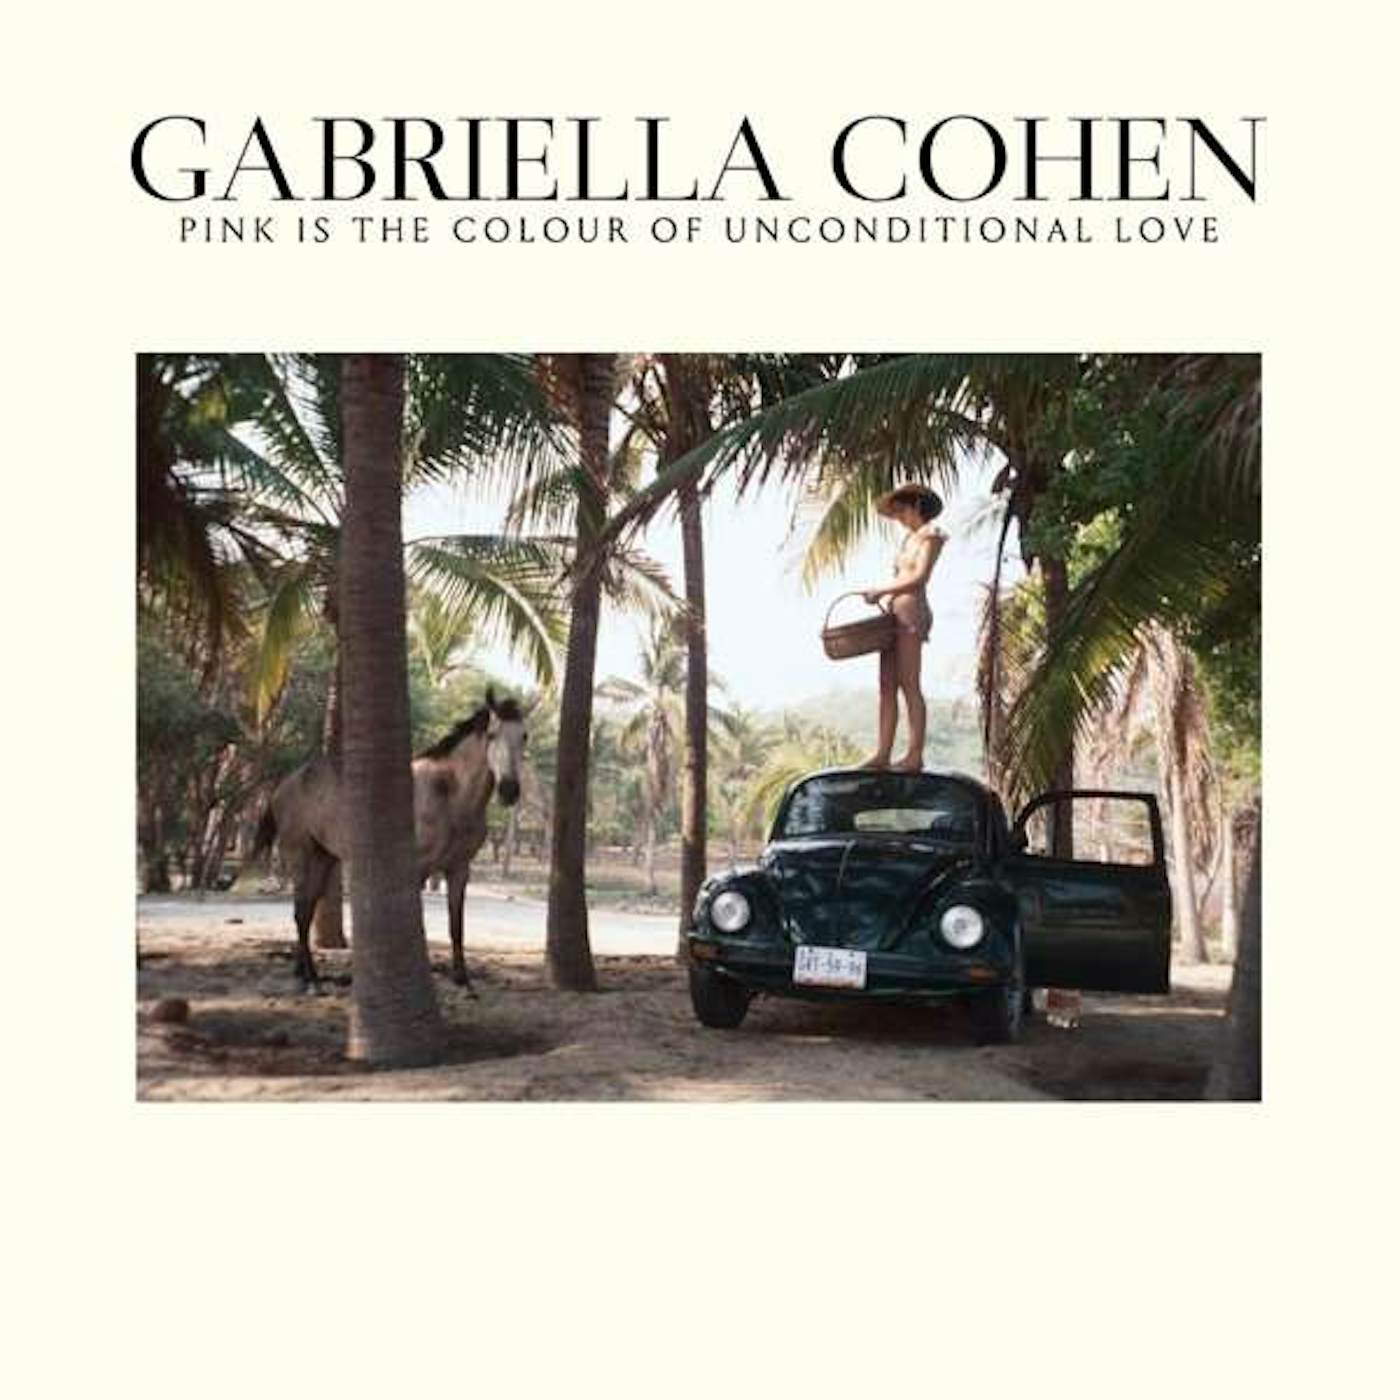 Gabriella Cohen PINK IS THE COLOUR OF UNCONDITIONAL Vinyl Record